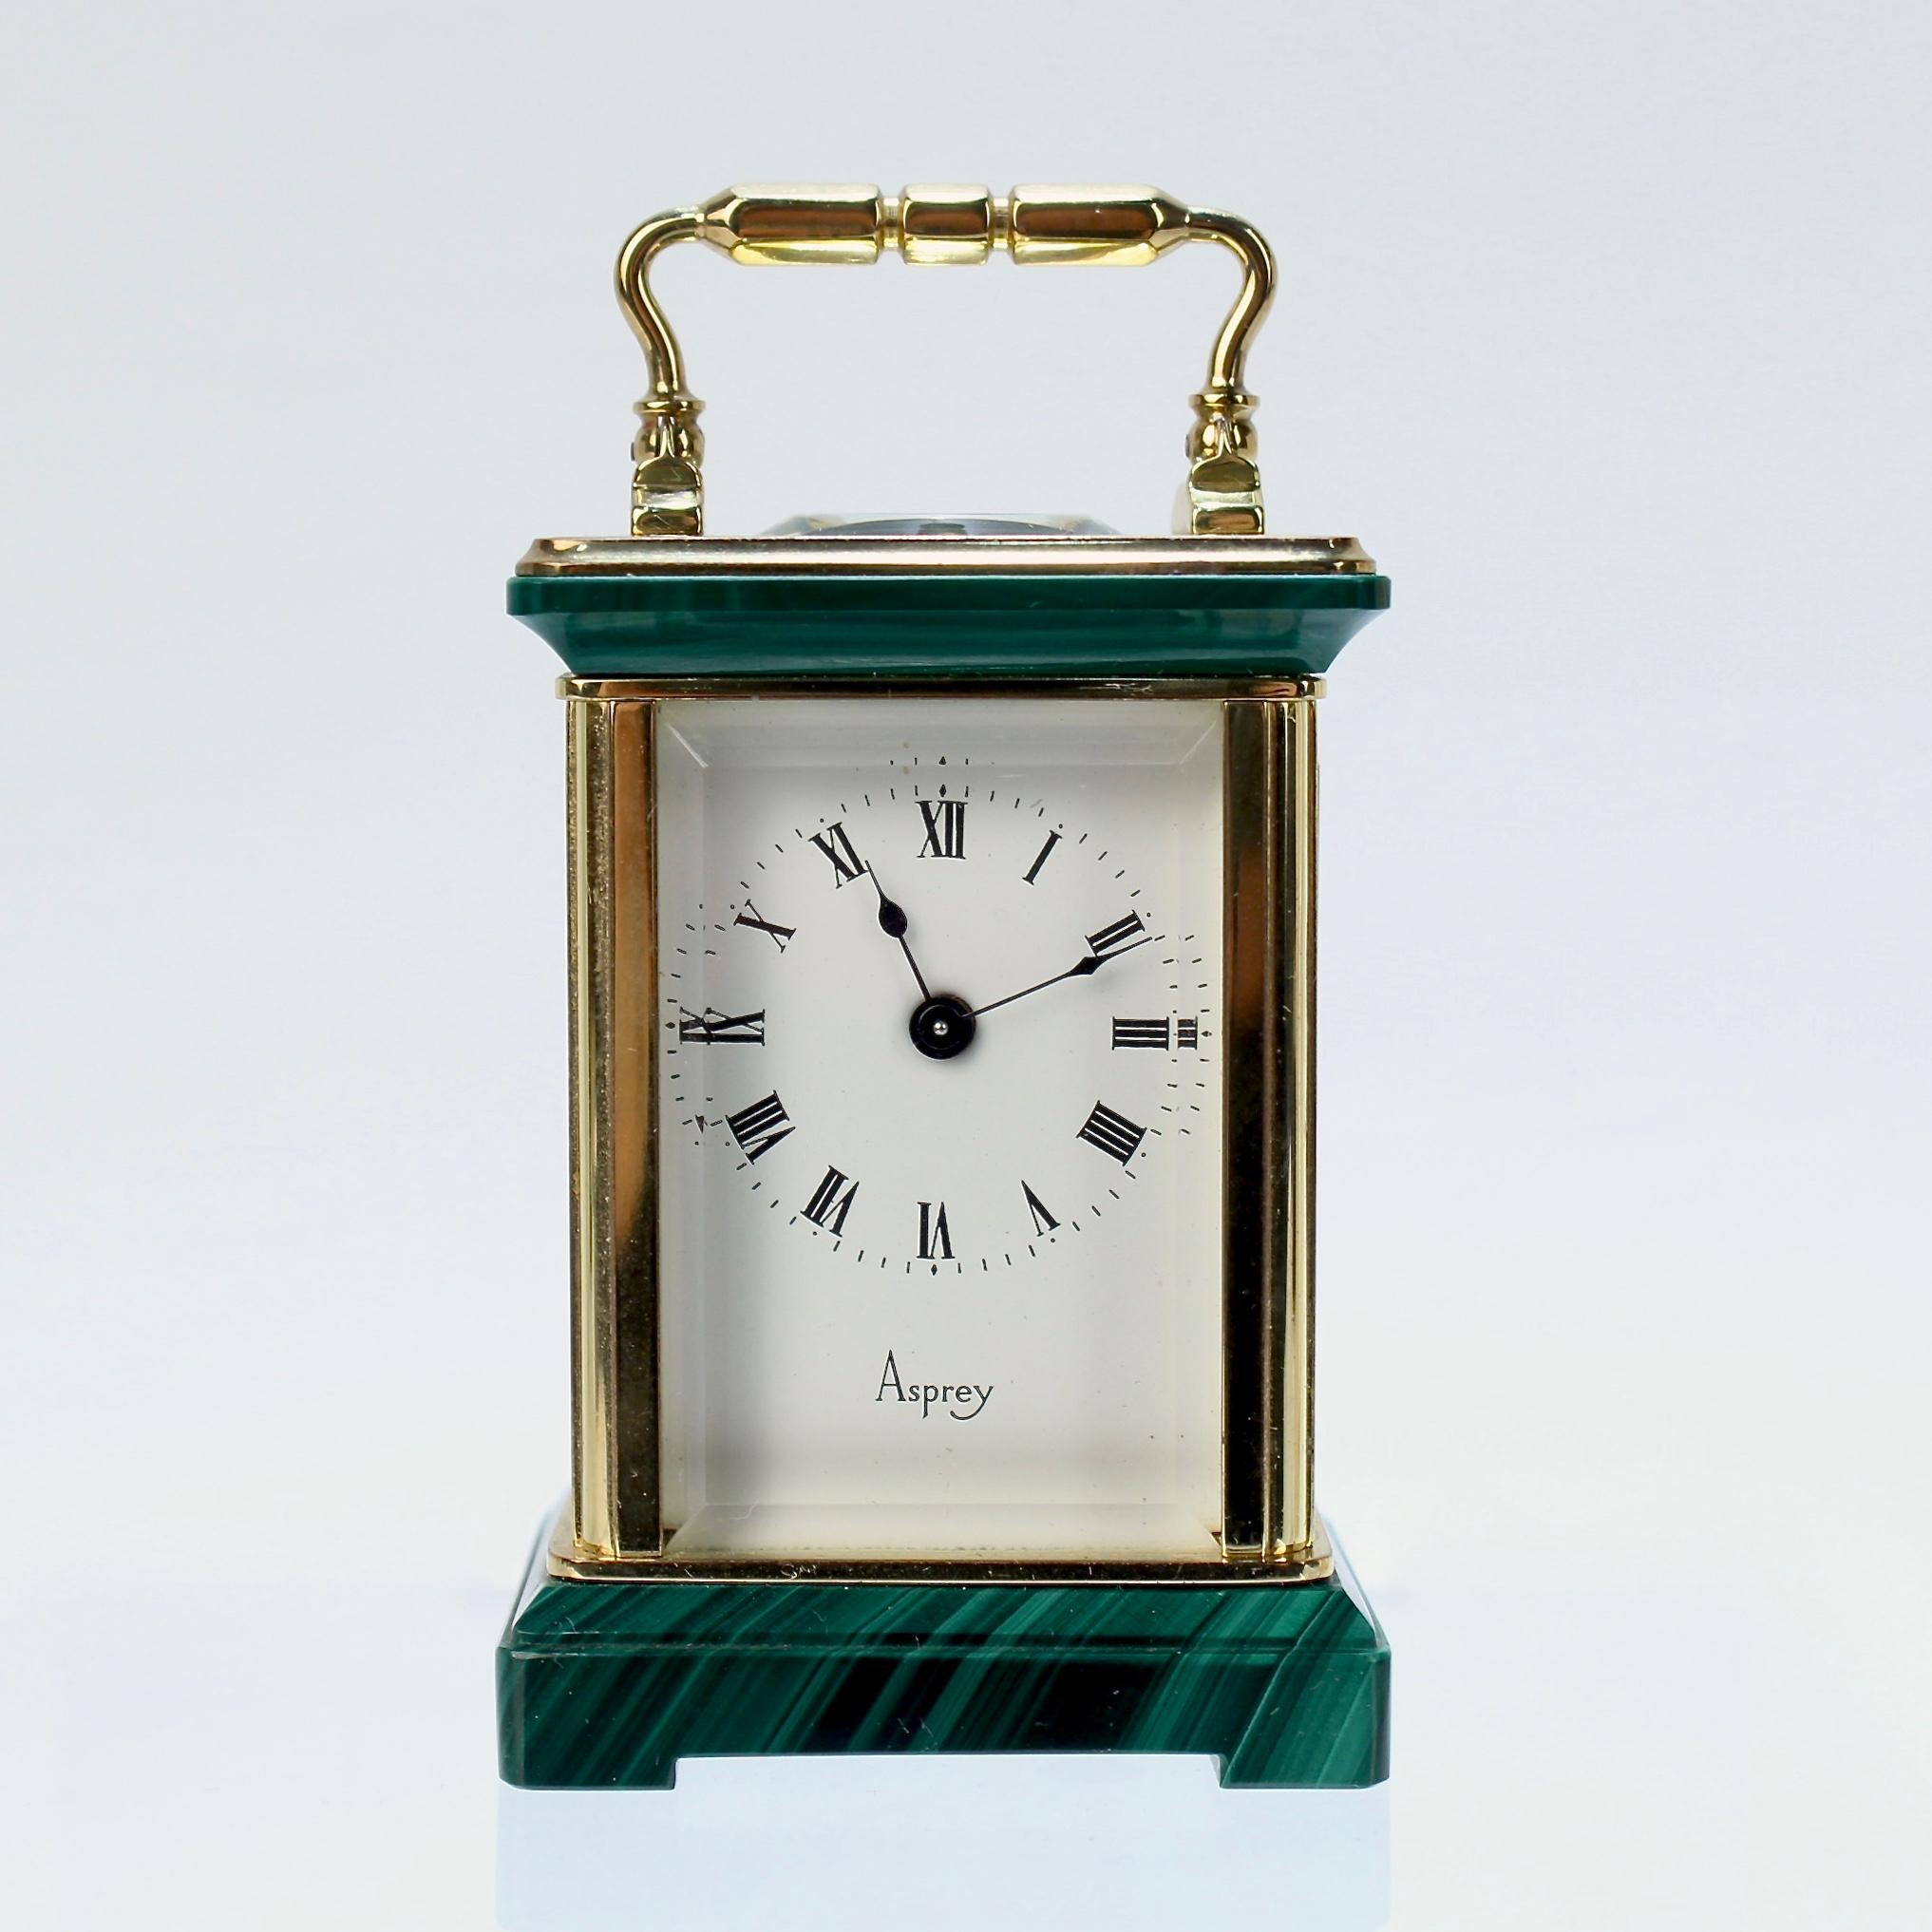 A very fine Asprey miniature carriage clock.

In brass with Malachite elements incorporated to the top and base and French works.

Marked Asprey to the face. Together with 2 associated keys for winding.

Height: ca. 2 3/4 in.

Items purchased from